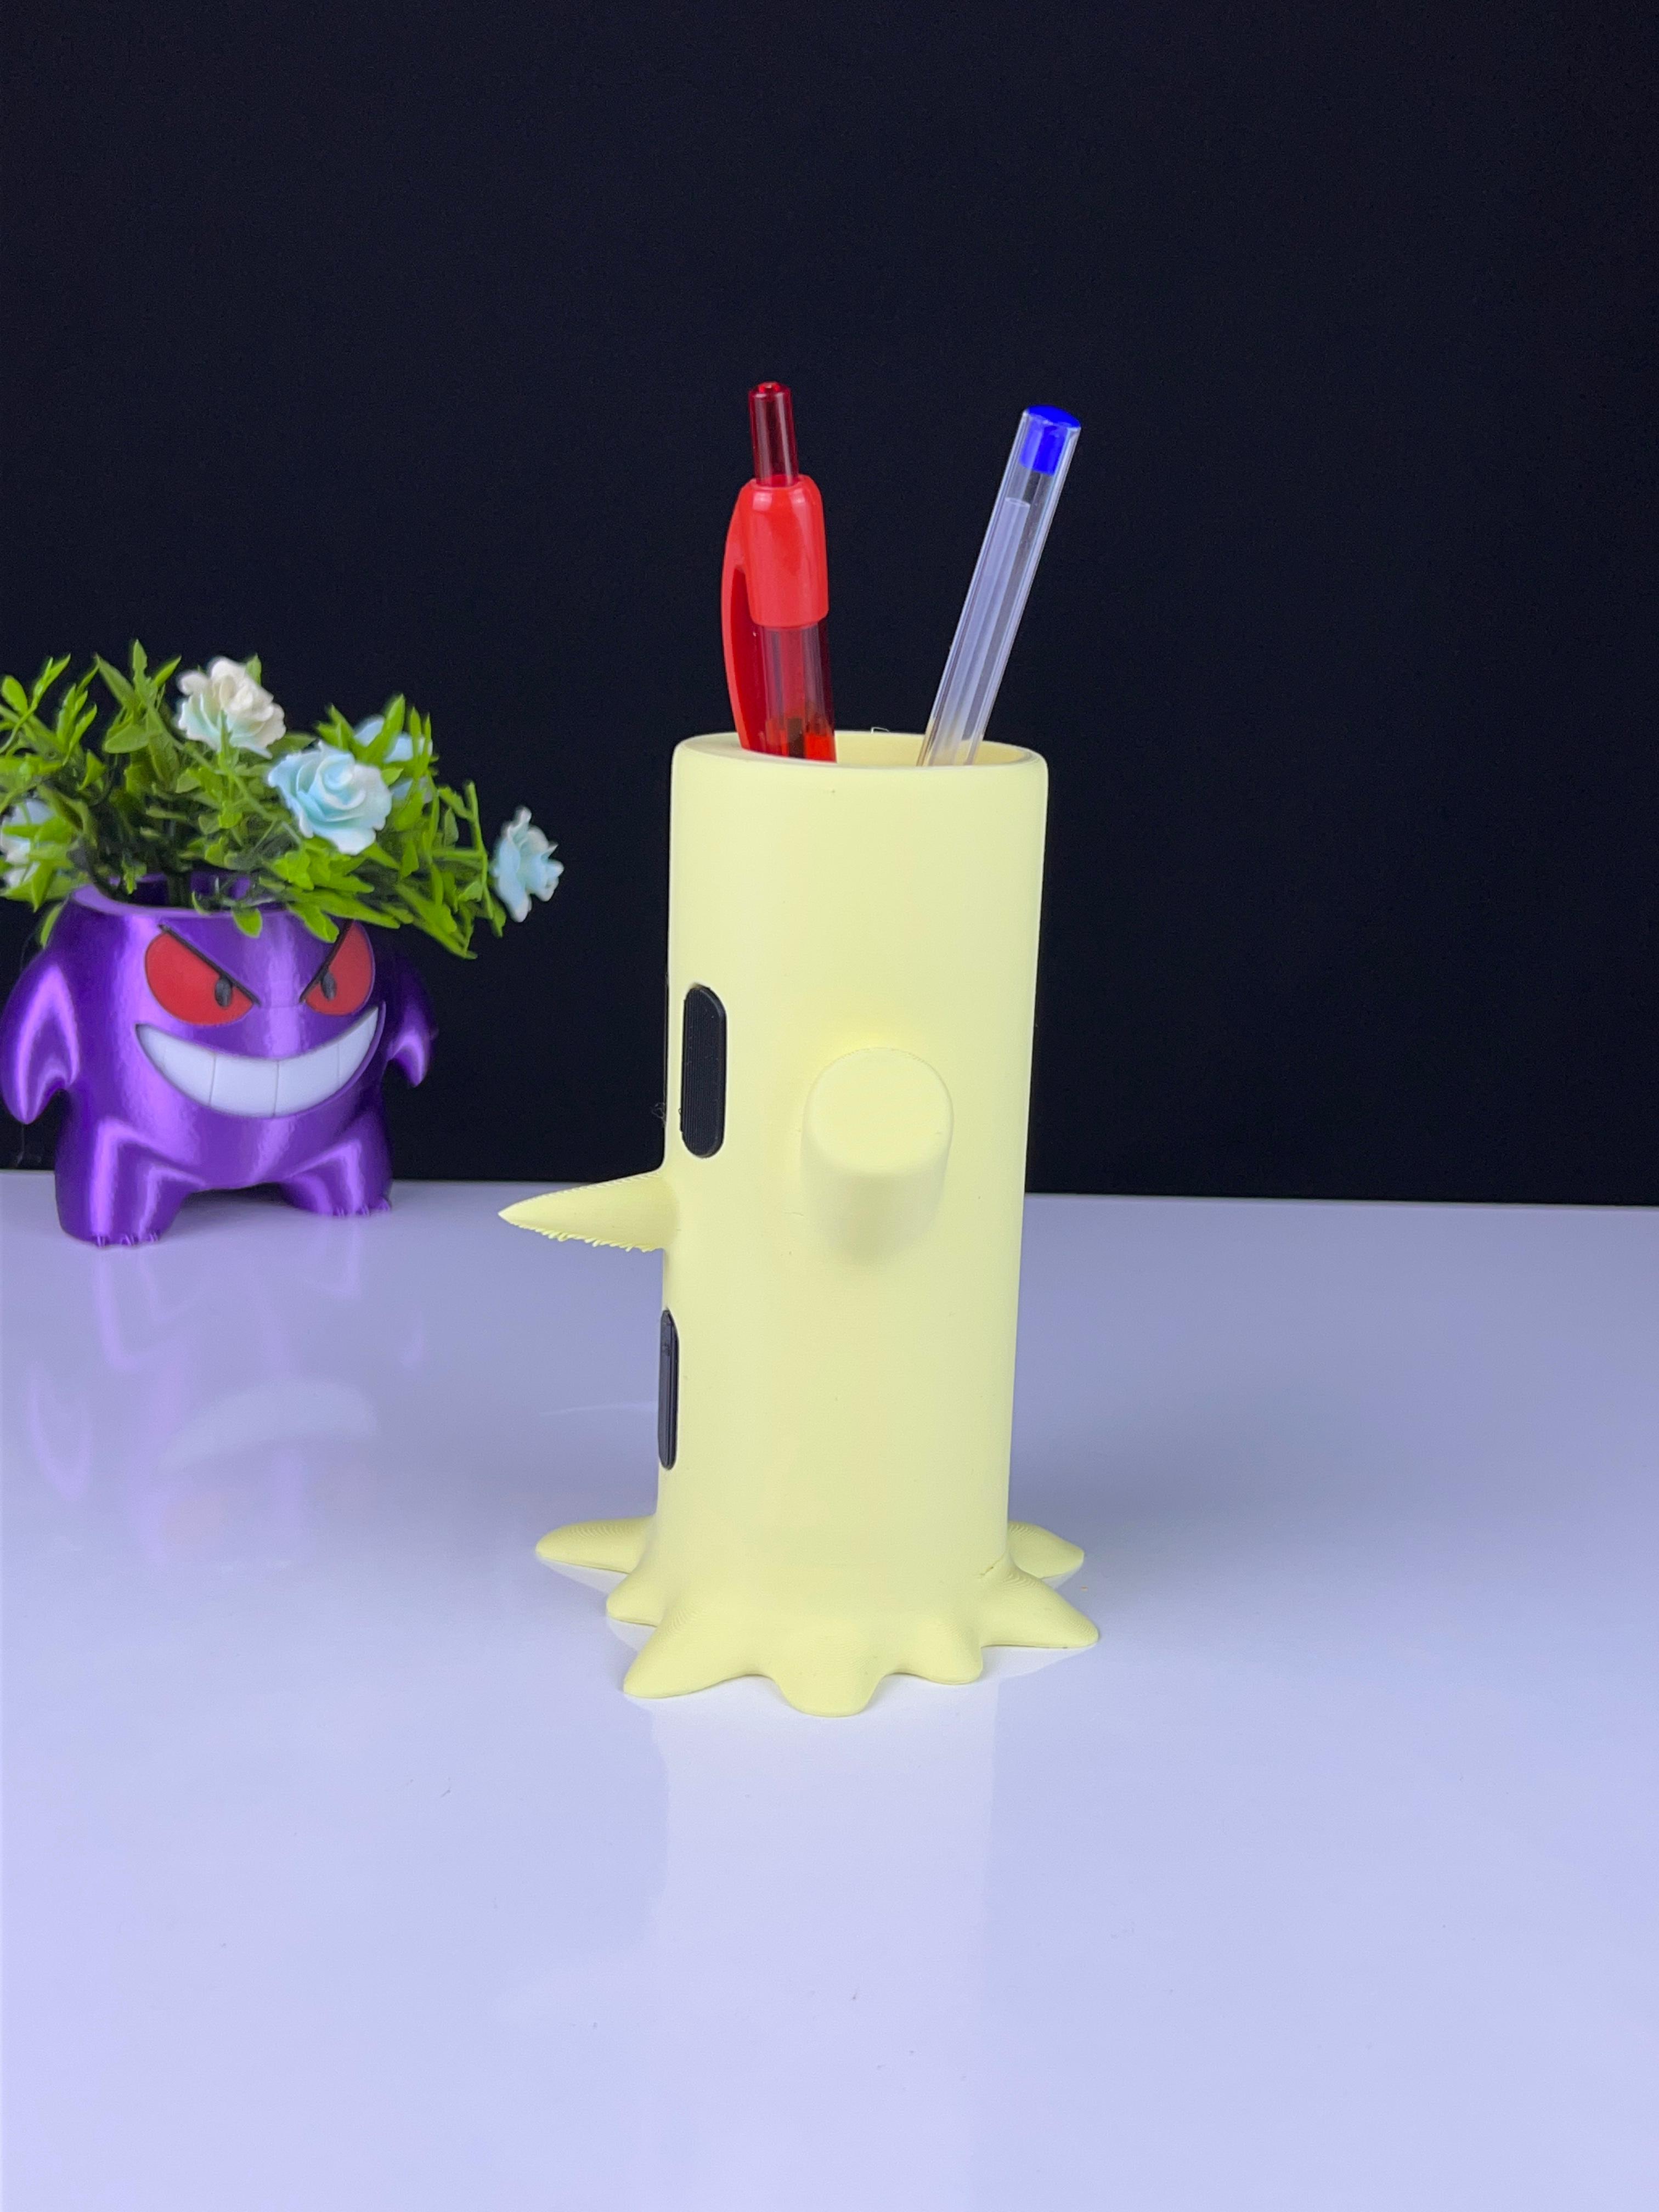 3D Printed Pen Stand by WallTosh